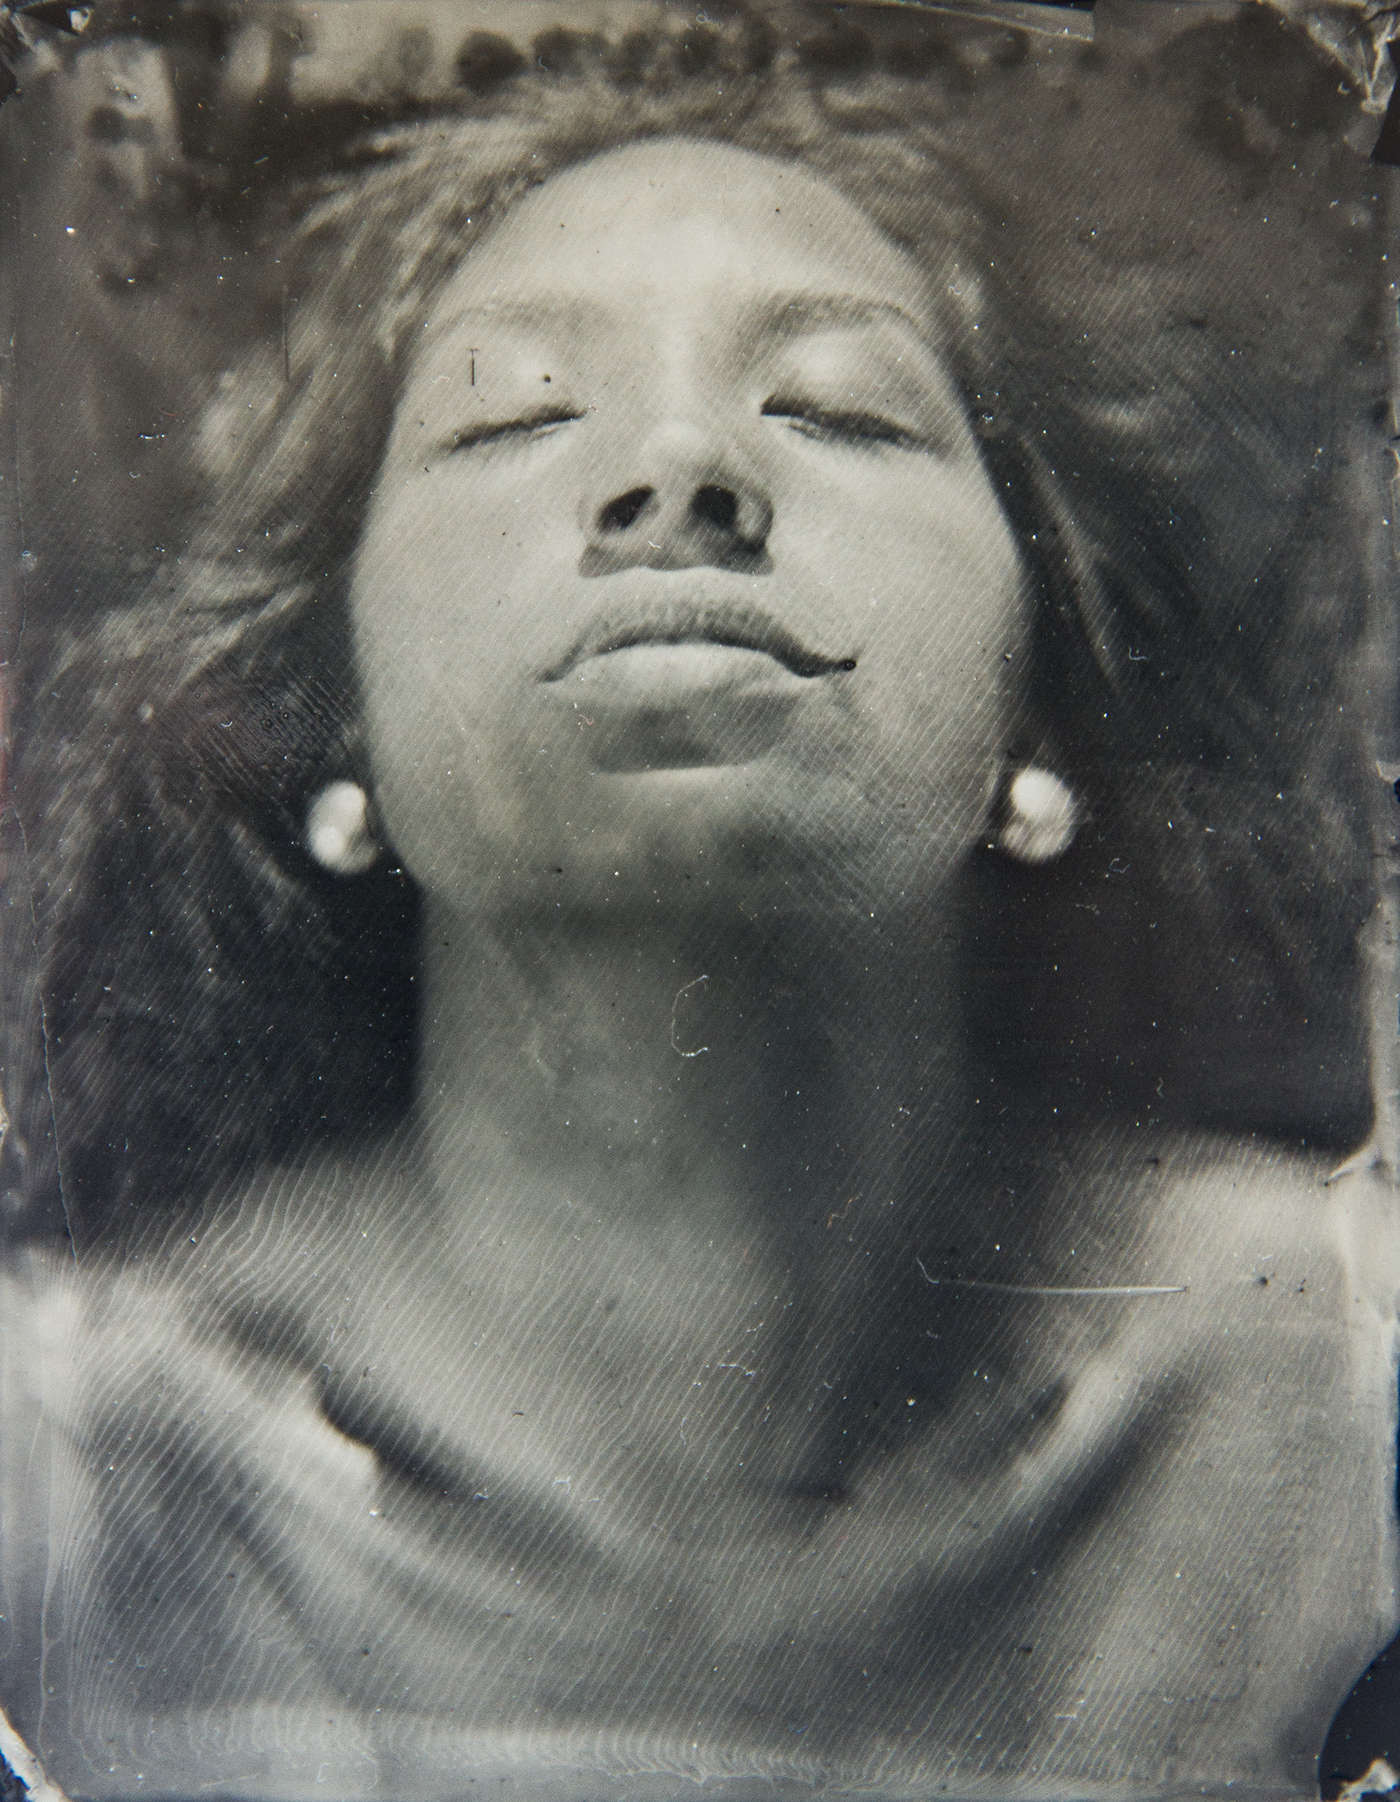 portrait portrait photography wetplate photography Ambrotype wetplate wetplatecollodion